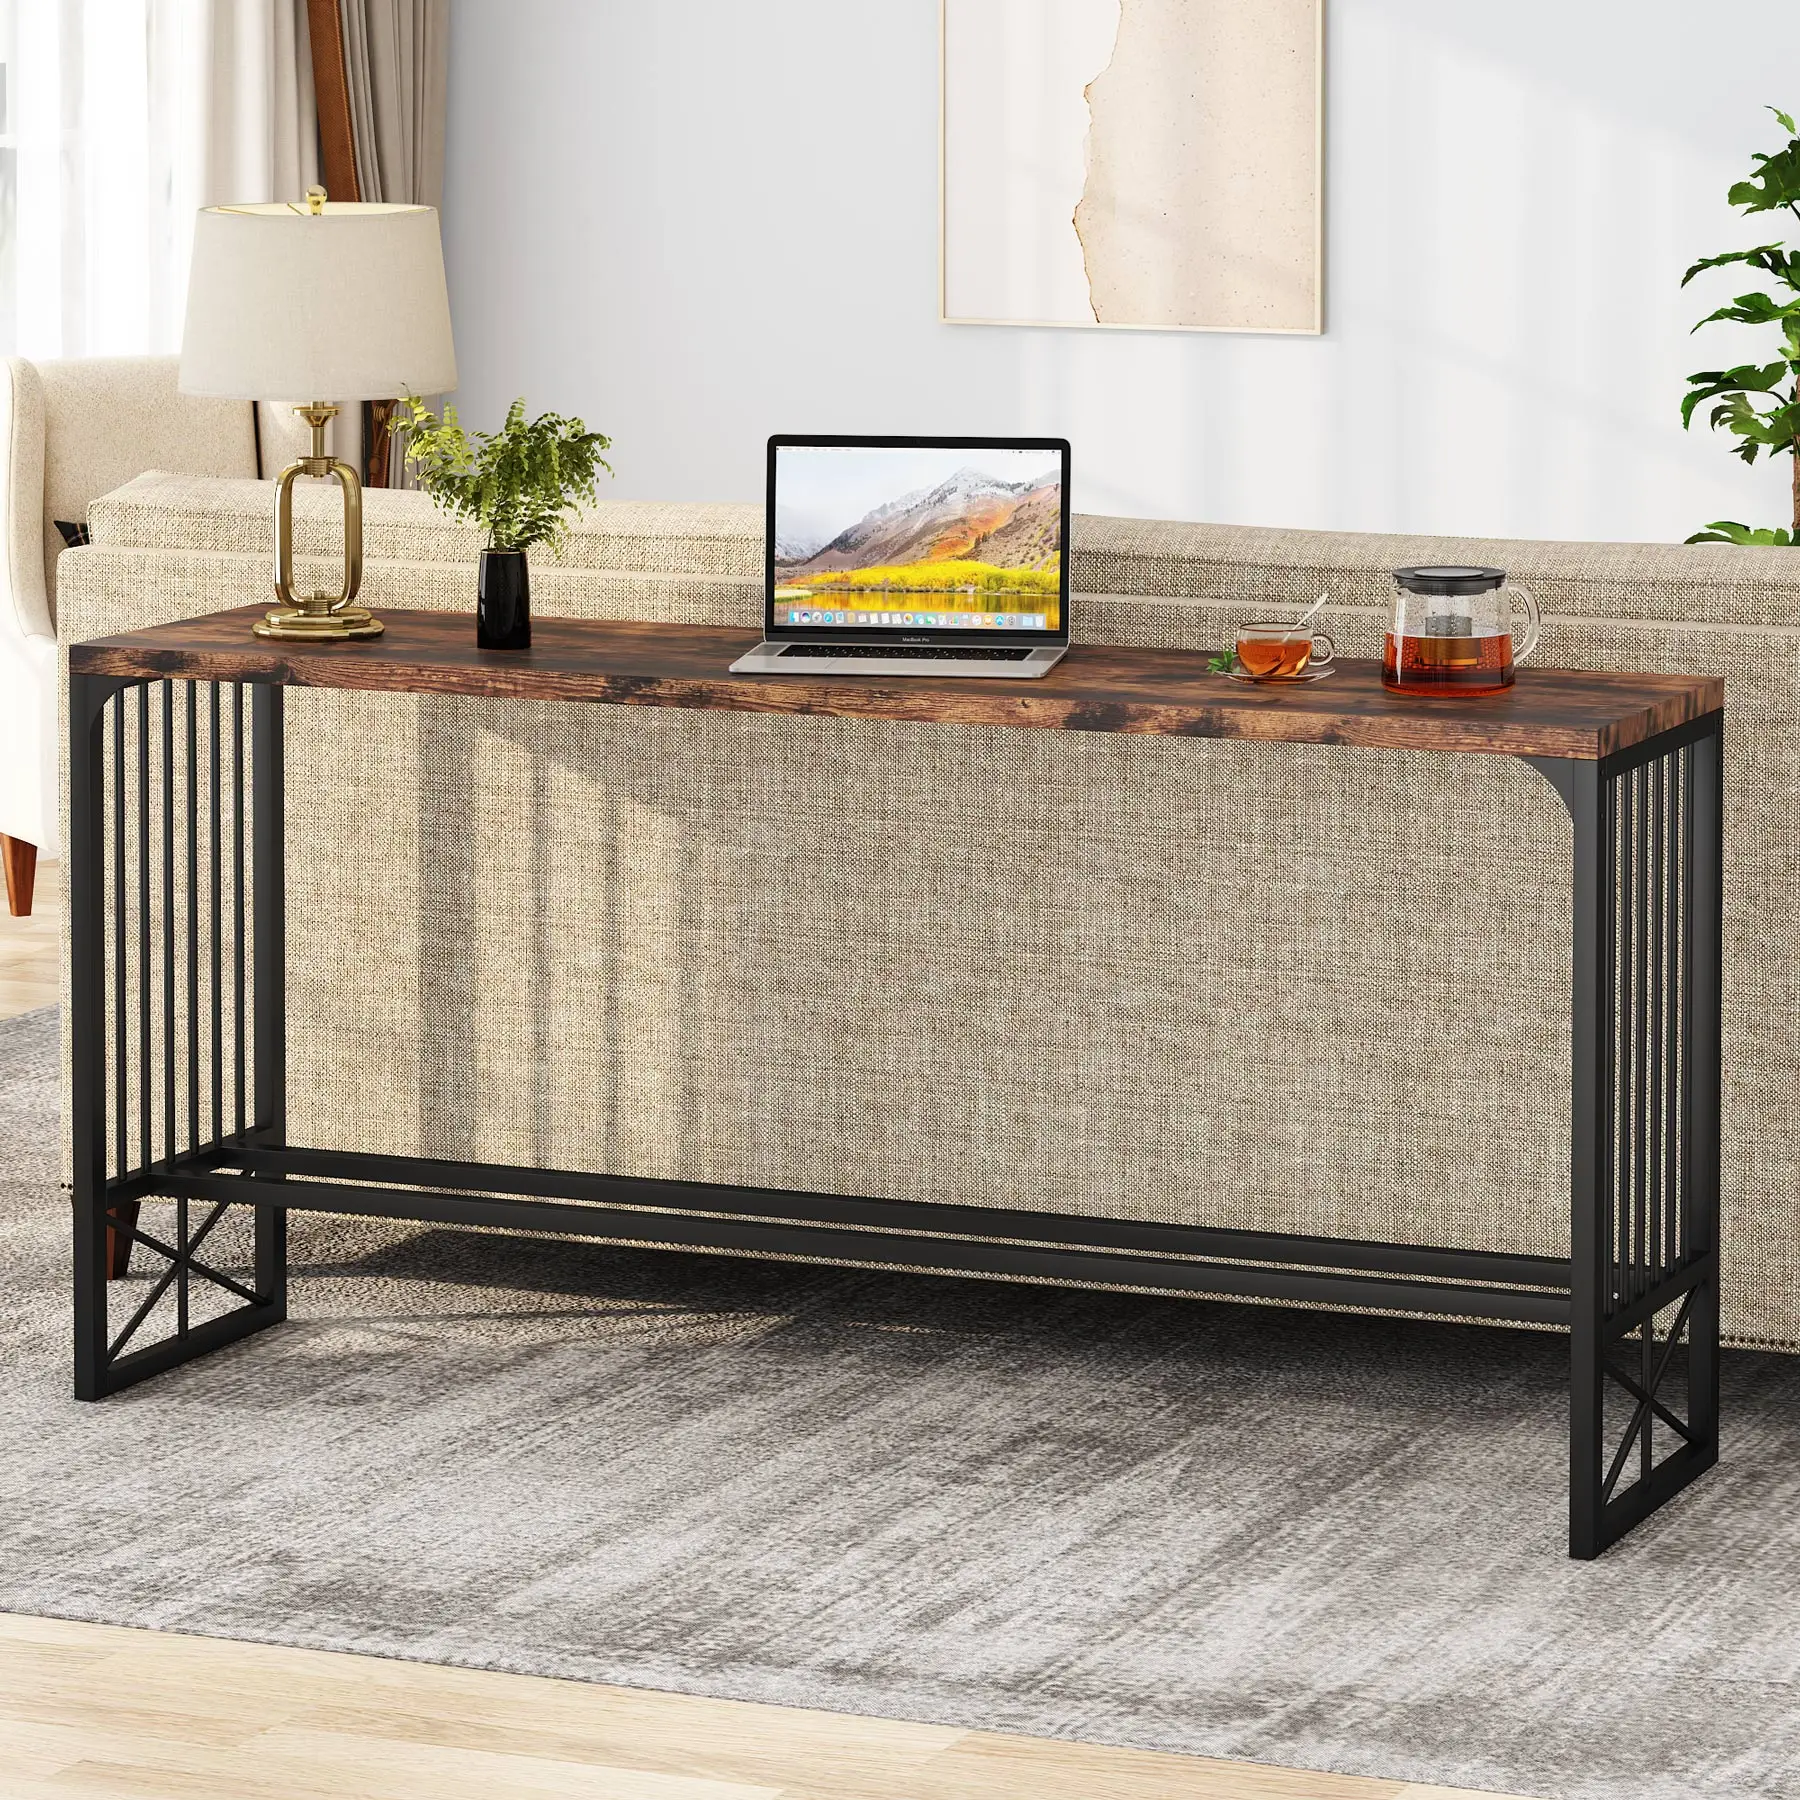 70.9 inch Industrial Sofa Wood Wall Long Narrow Console Table For Living Room Furniture